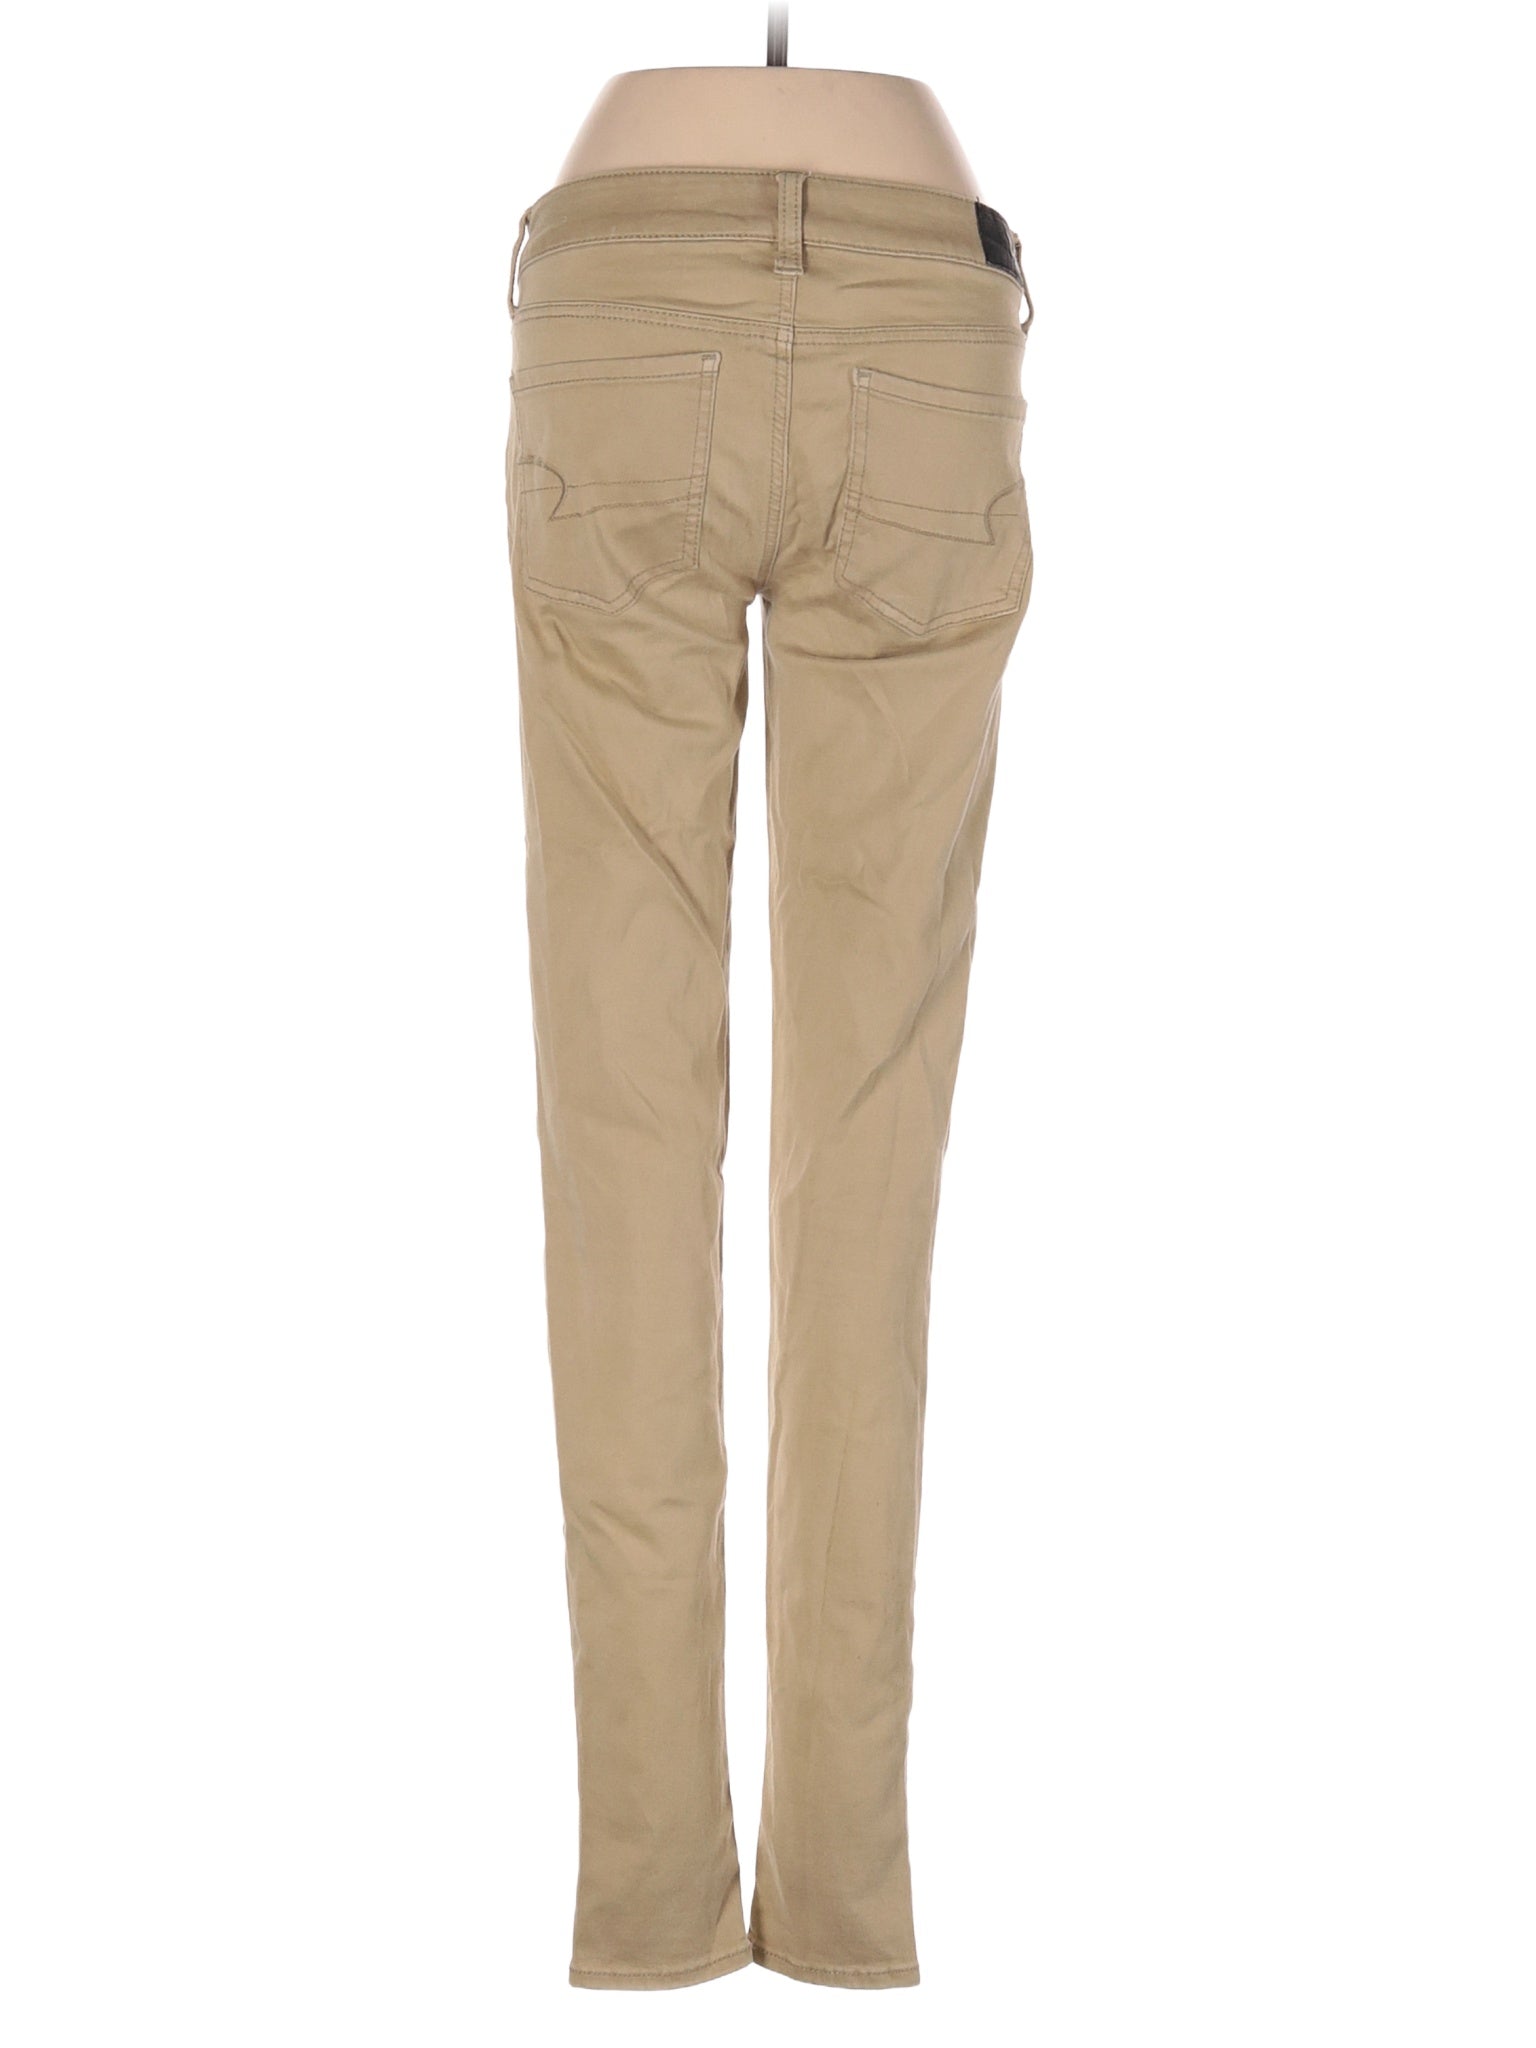 Casual Pant size - 2